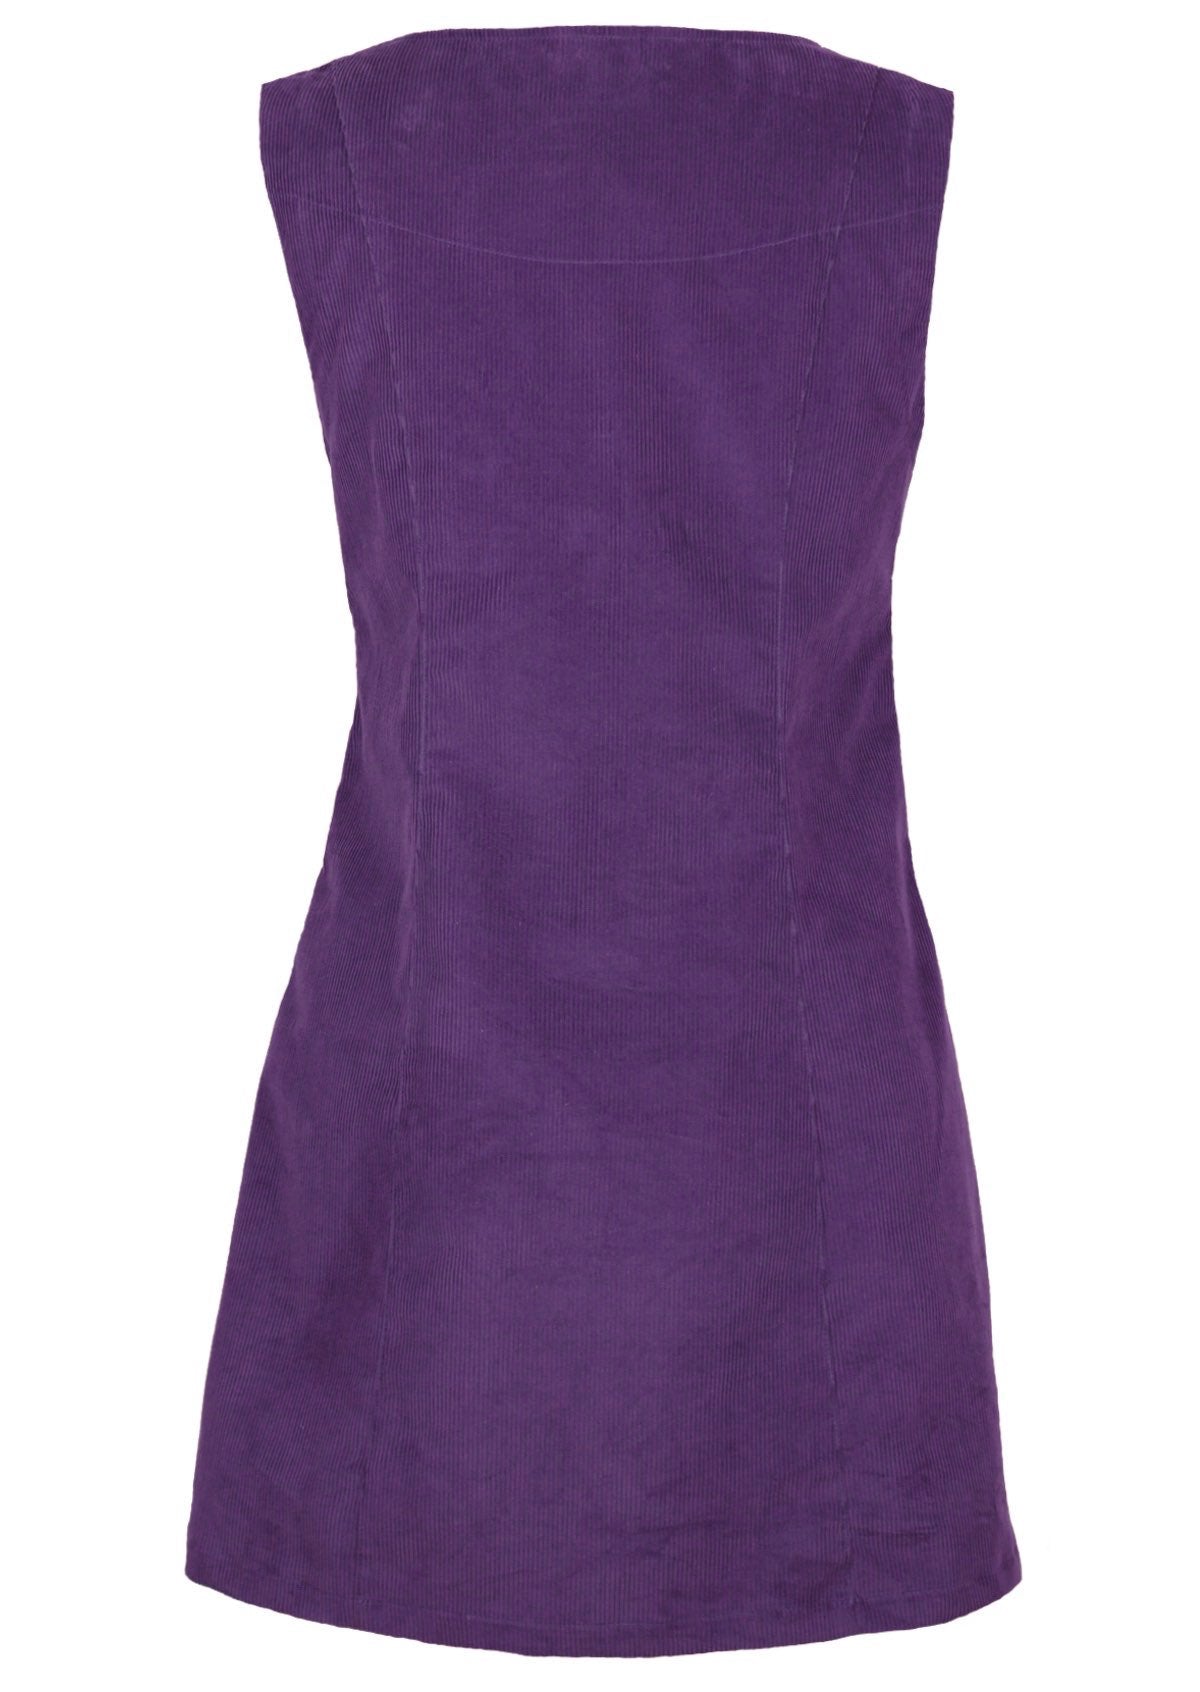 Fitted purple tunic has an a-line skirt shape. 